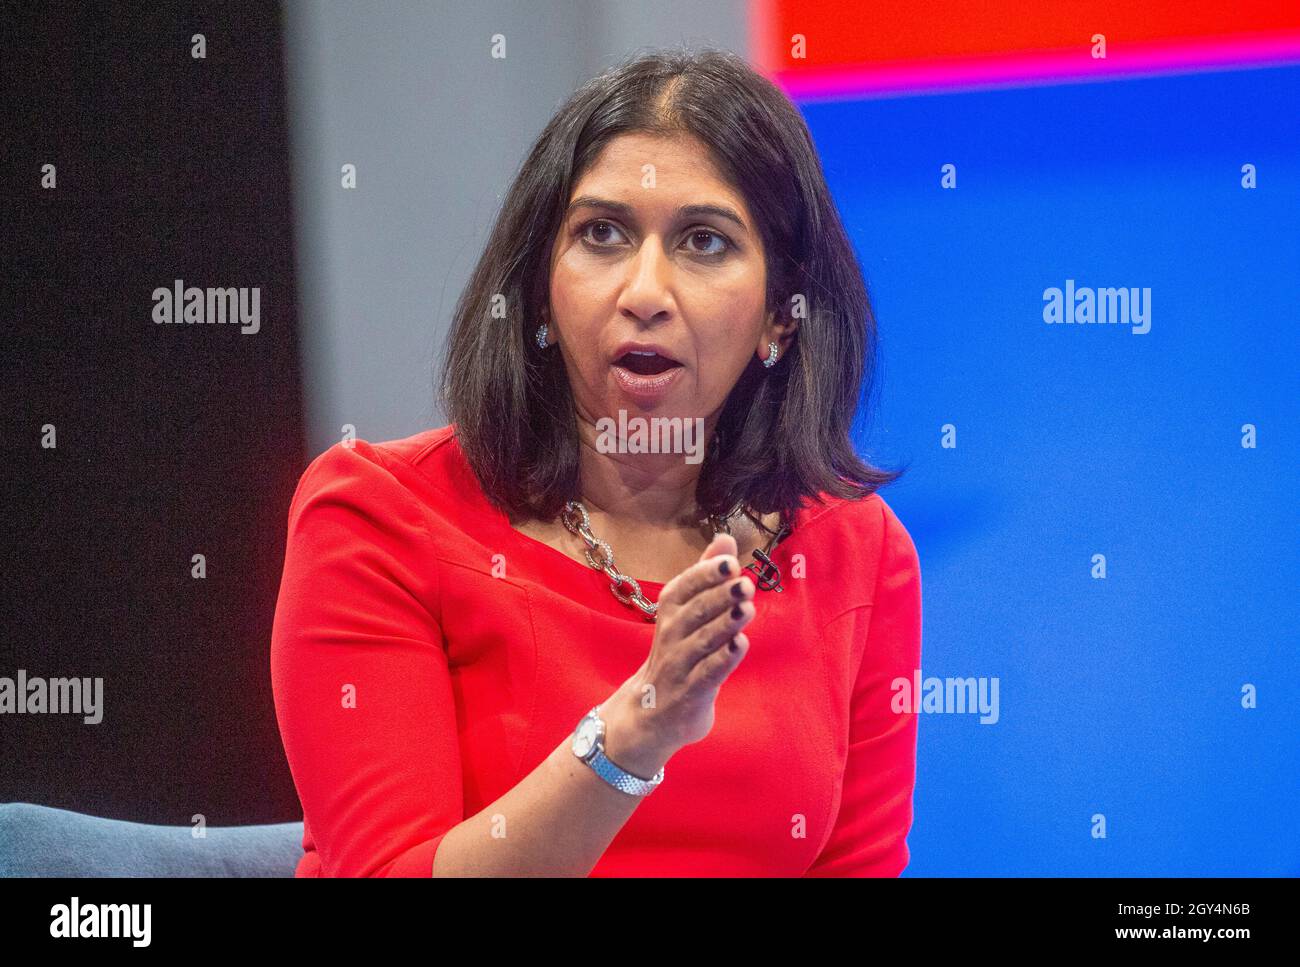 Suella Braverman, Attorney General for England and Wales and Advocate General for Northern Ireland, at the Conservative Party Conference. Stock Photo